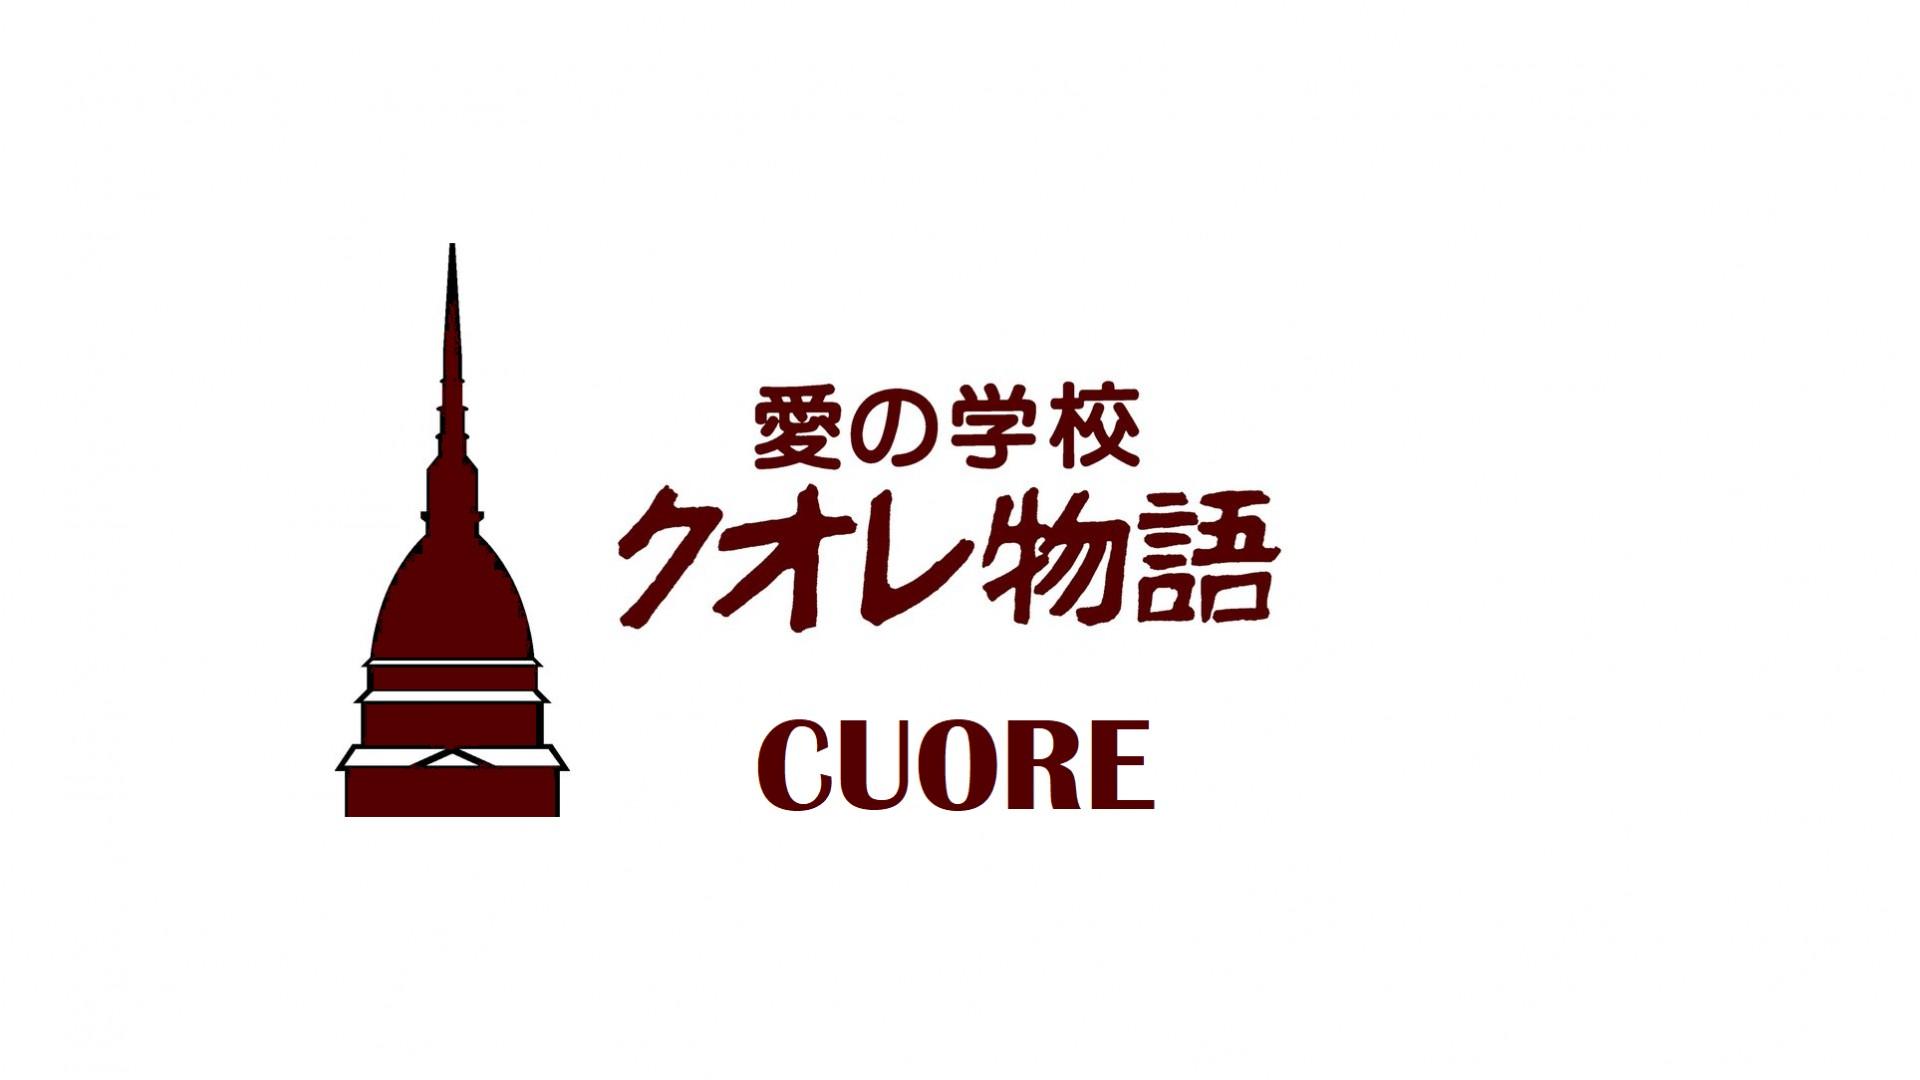 The Story of Cuore, School of Love